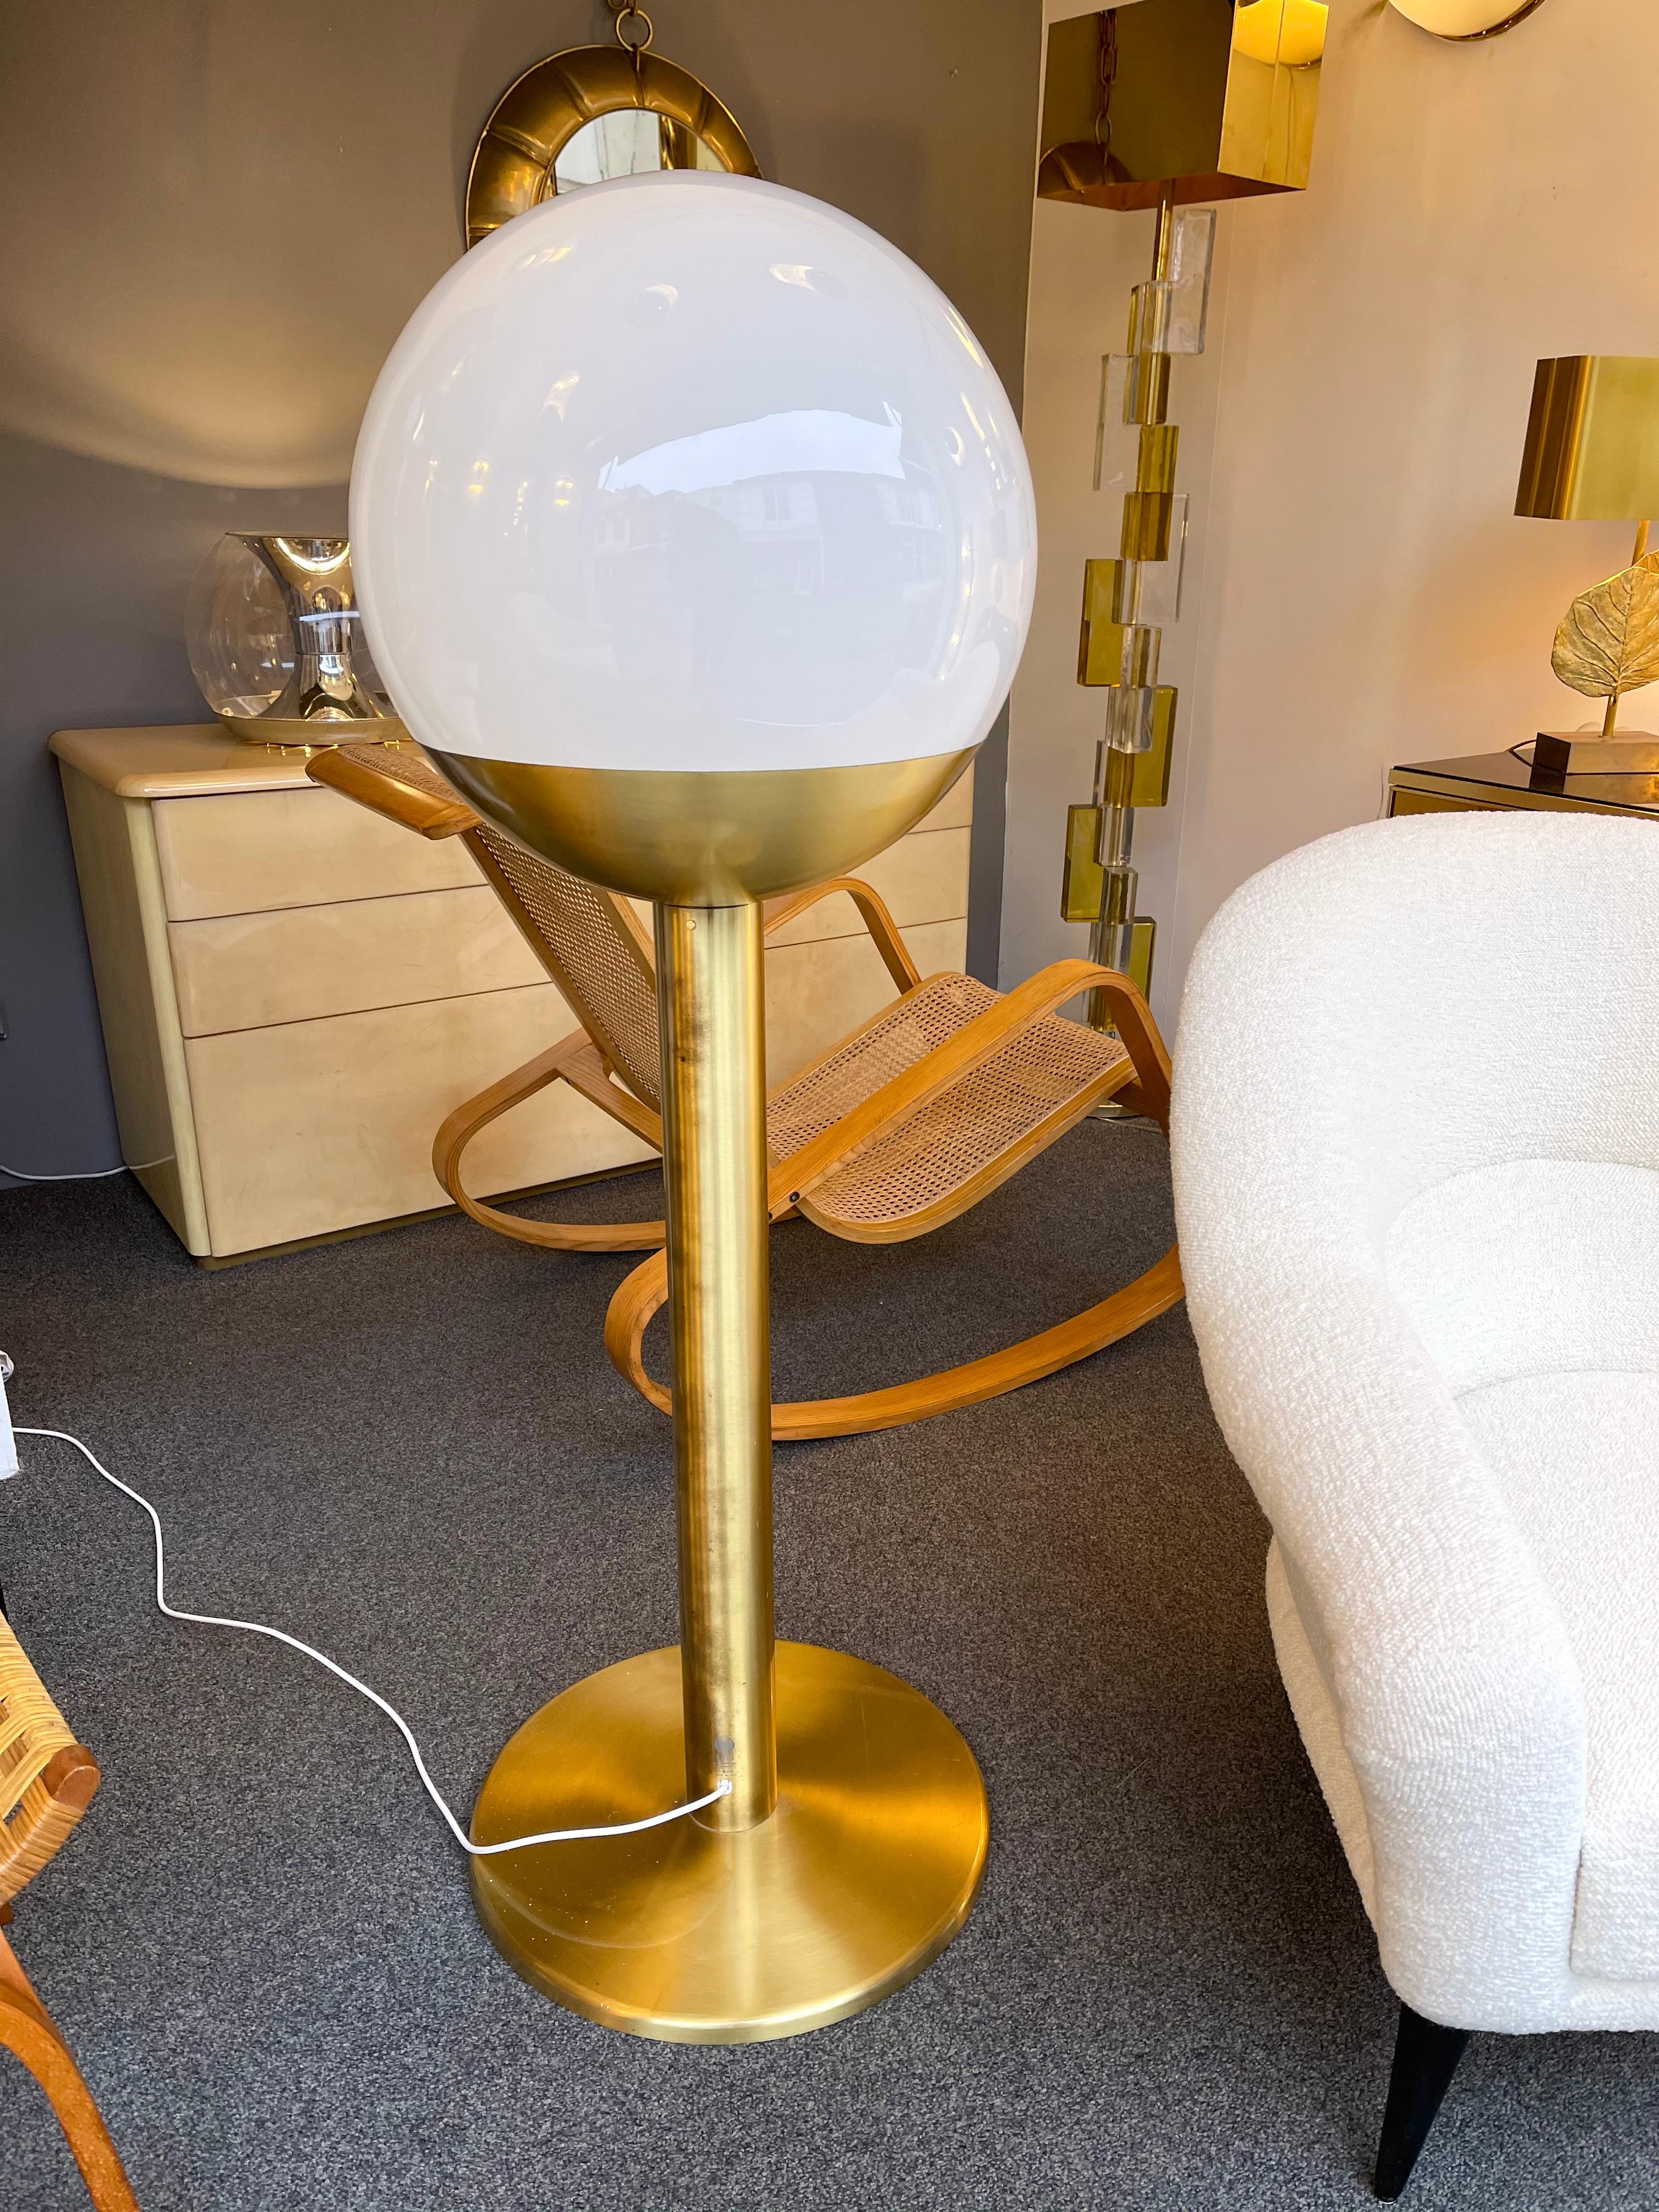 Italian Brass and Glass Floor Lamp P428 by Pia Guidetti Crippa for Luci, Italy, 1970s For Sale